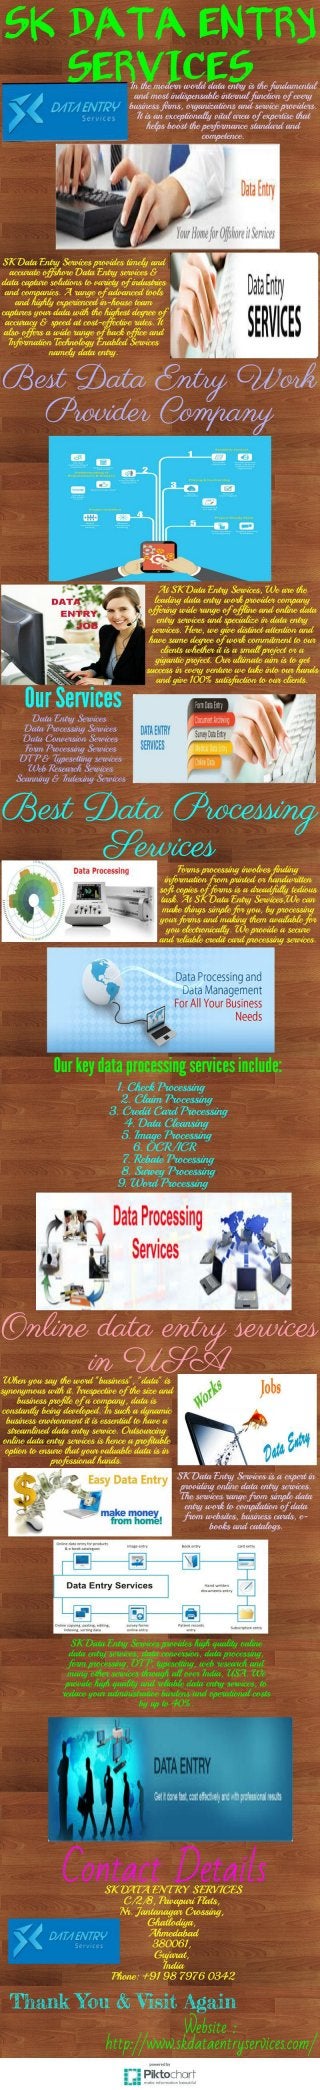 Best outsourcing online data entry services